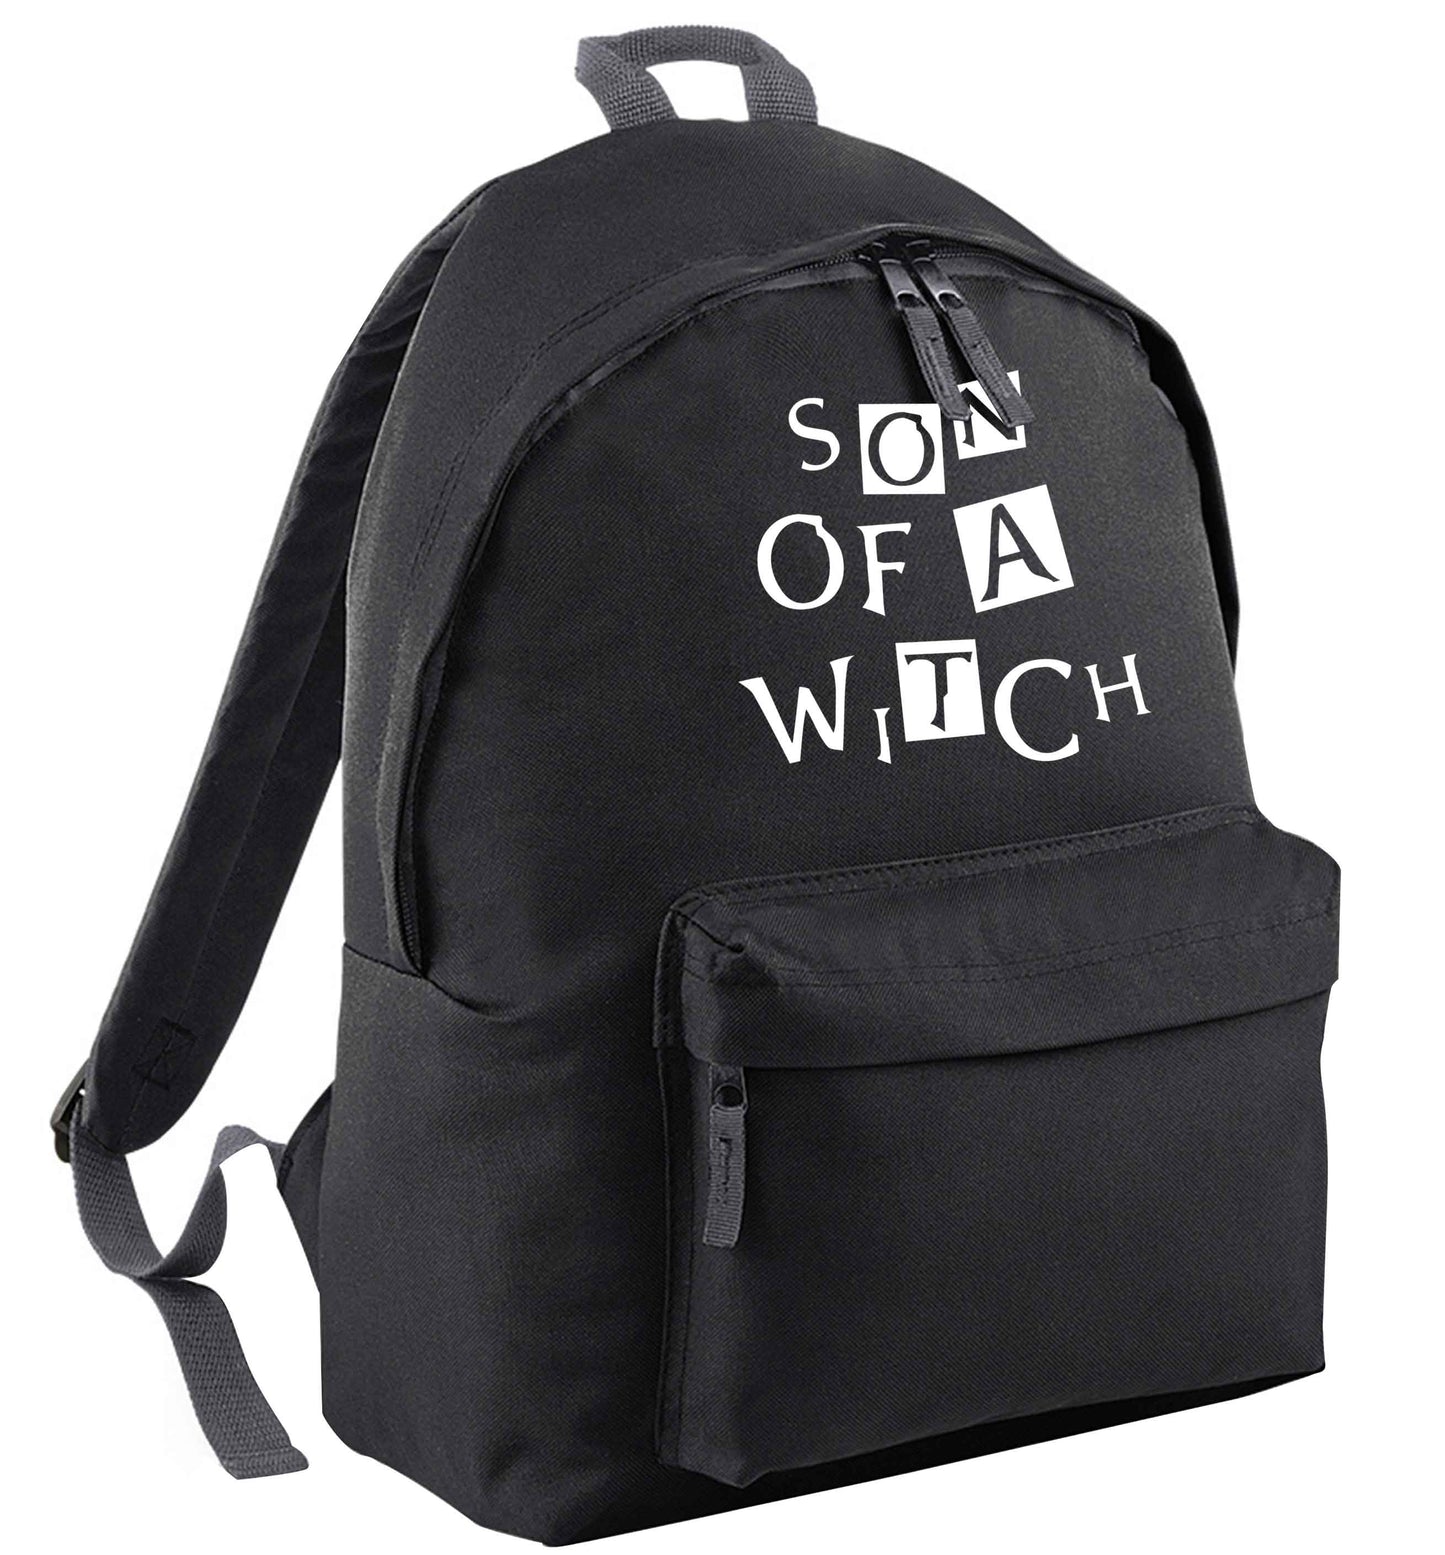 Son of a witch black adults backpack